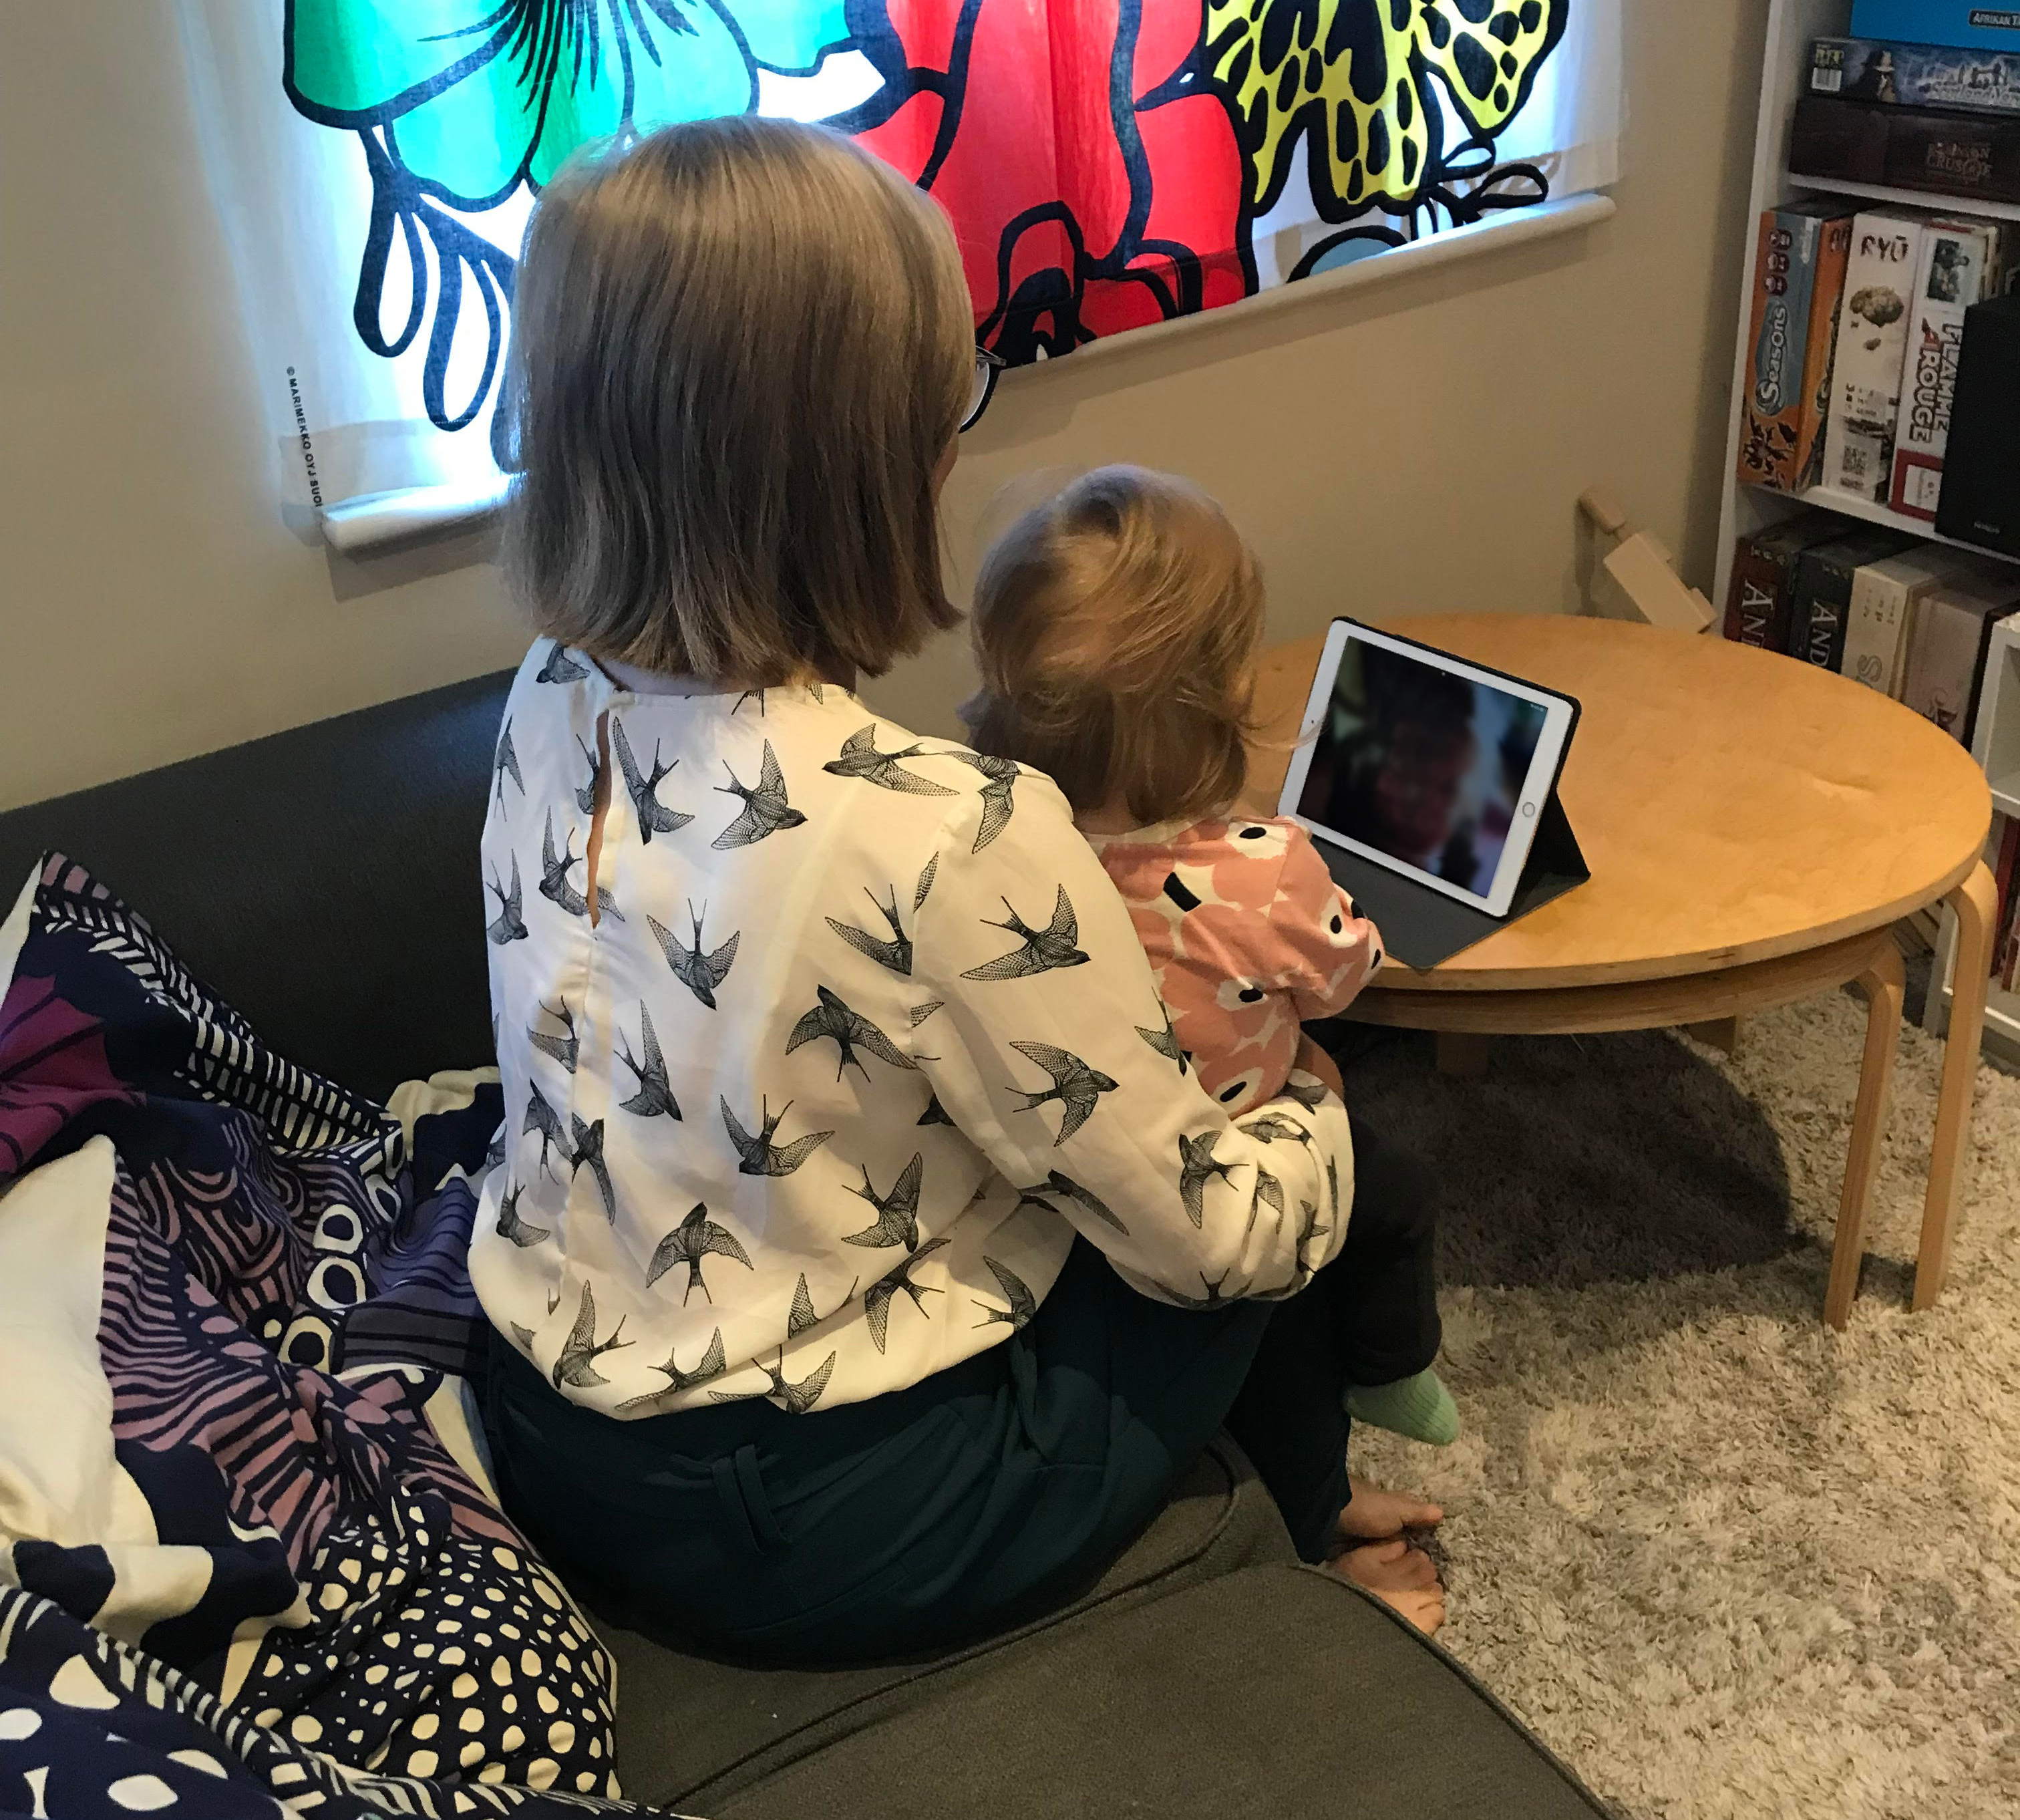 blond female with small child sat on lap looking at a tablet